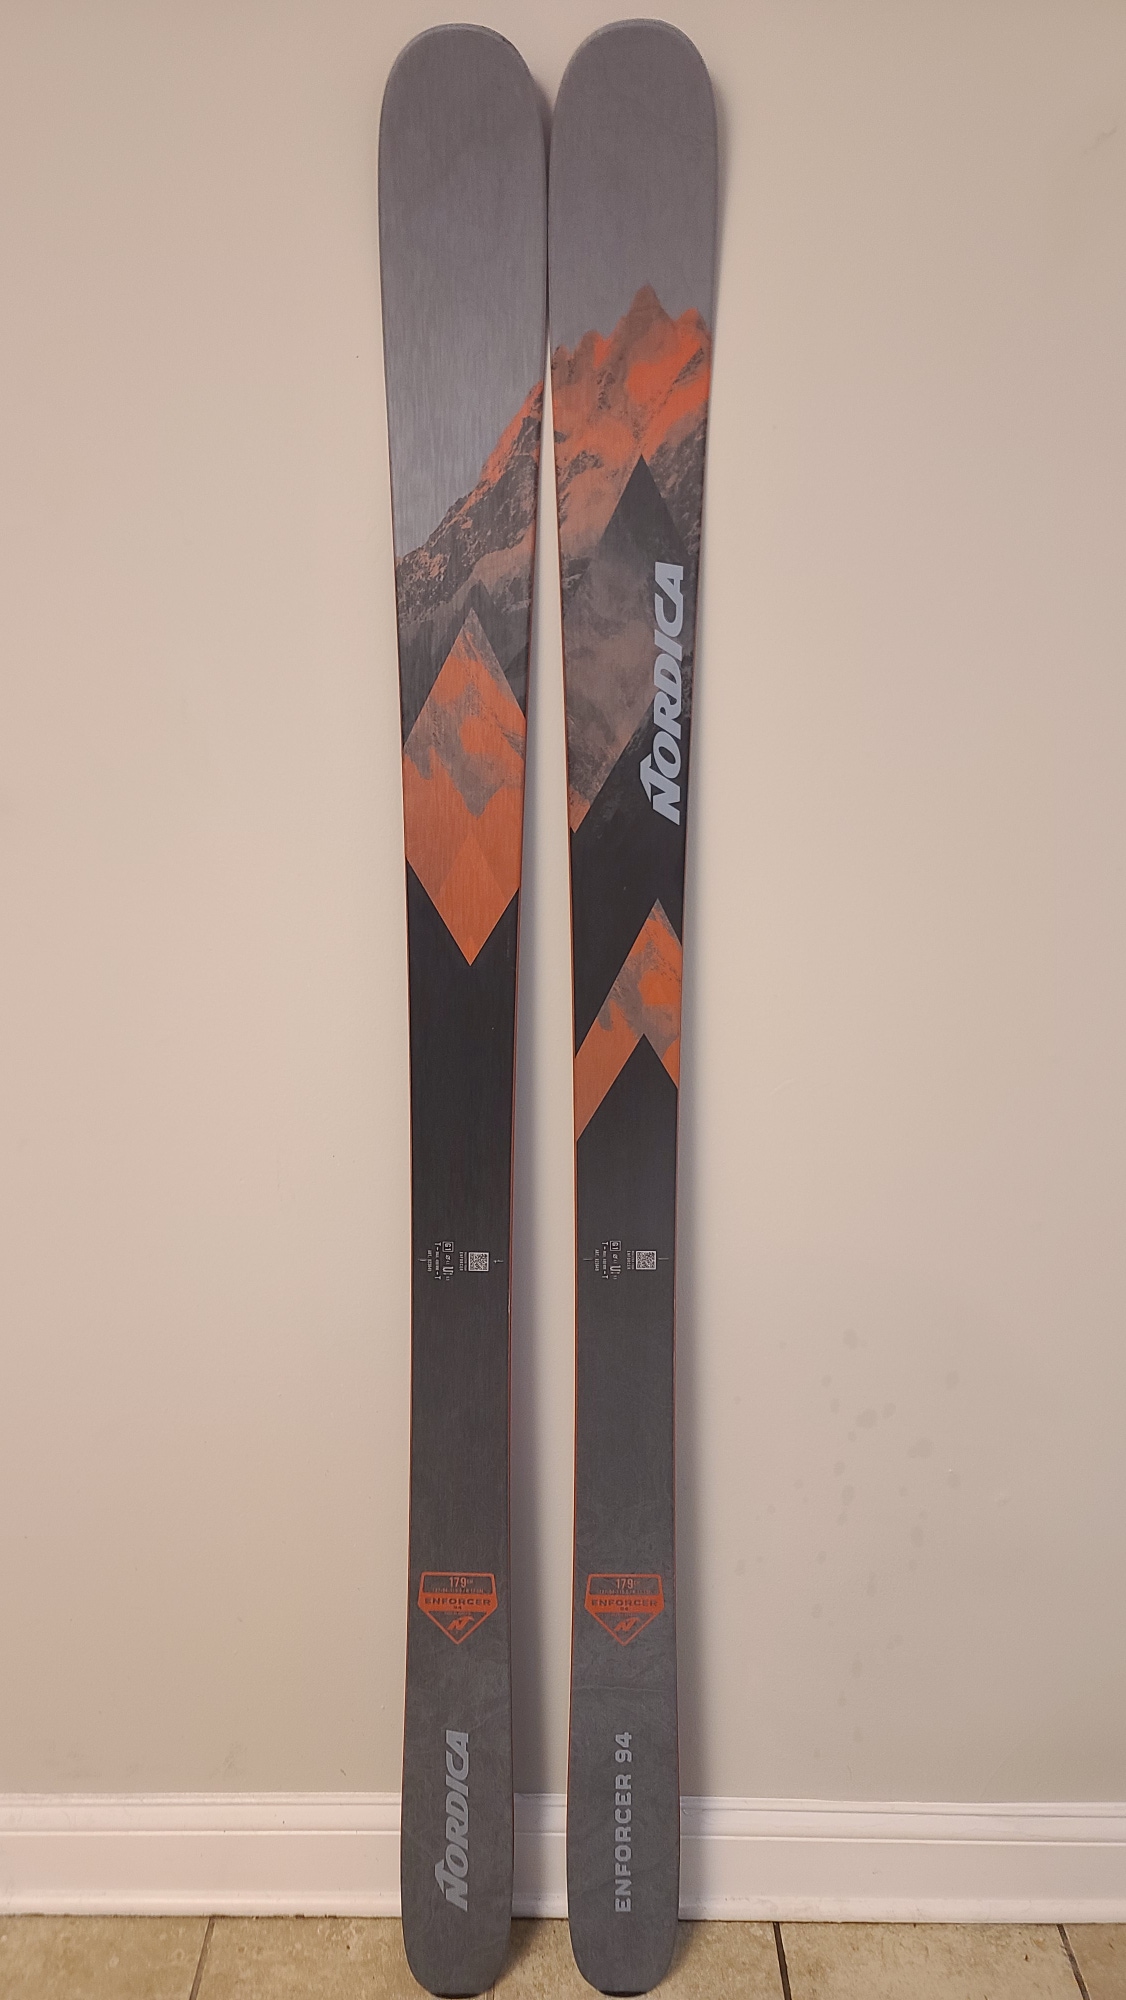 New 179 cm Nordica Enforcer 94  All Mountain Skis With Marker Griffon 13 Bindings